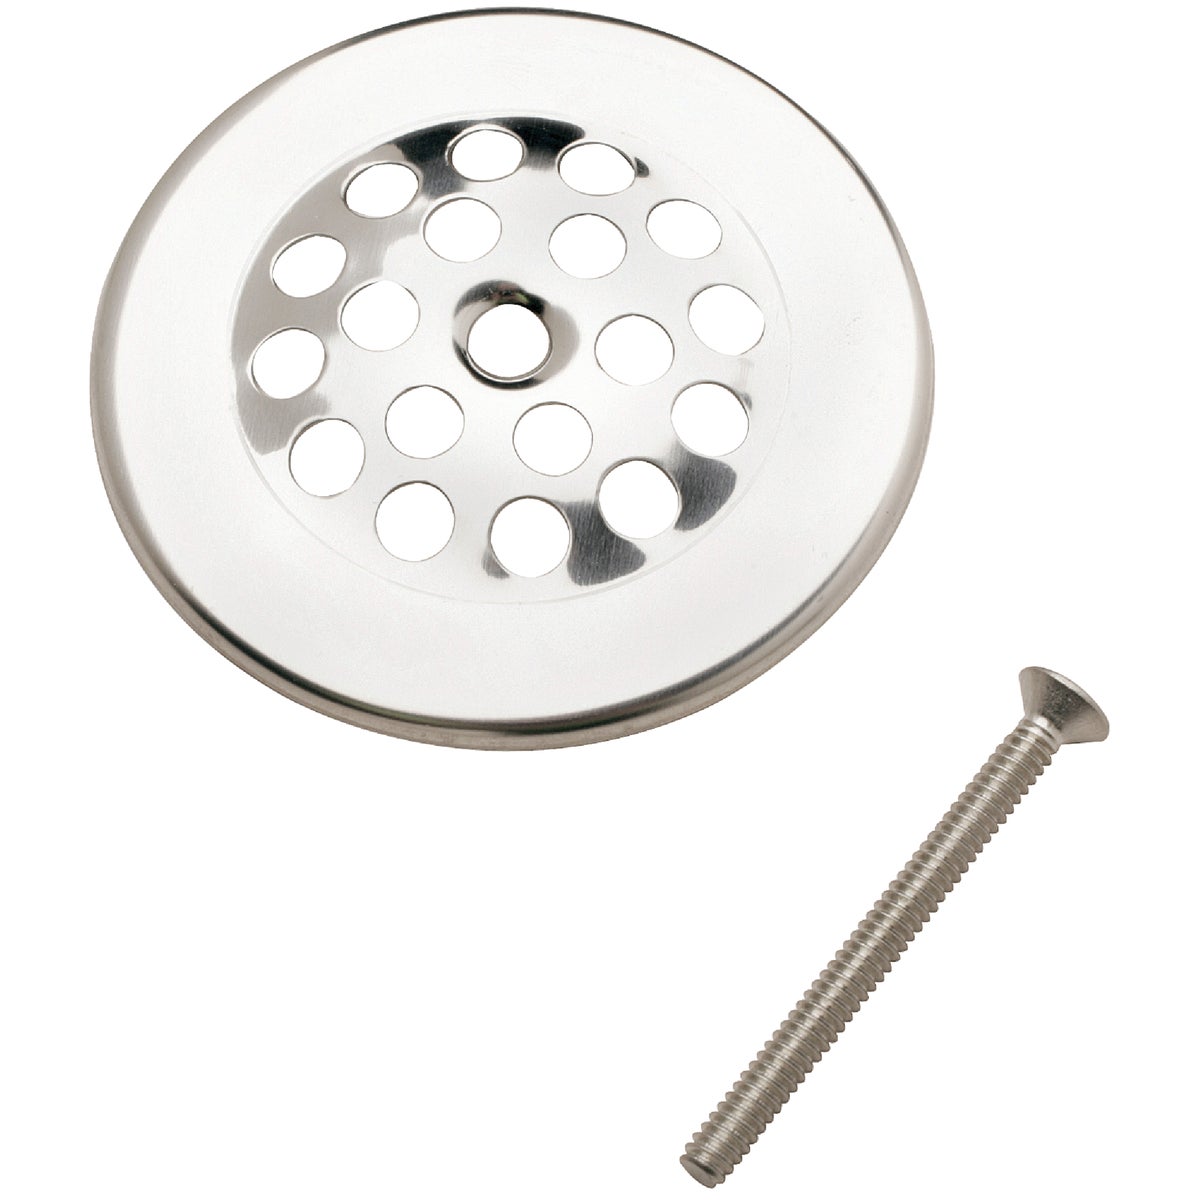 Item 438477, 2" O.D. strainer dome cover with screw for triplever bath drain. 2" screw.